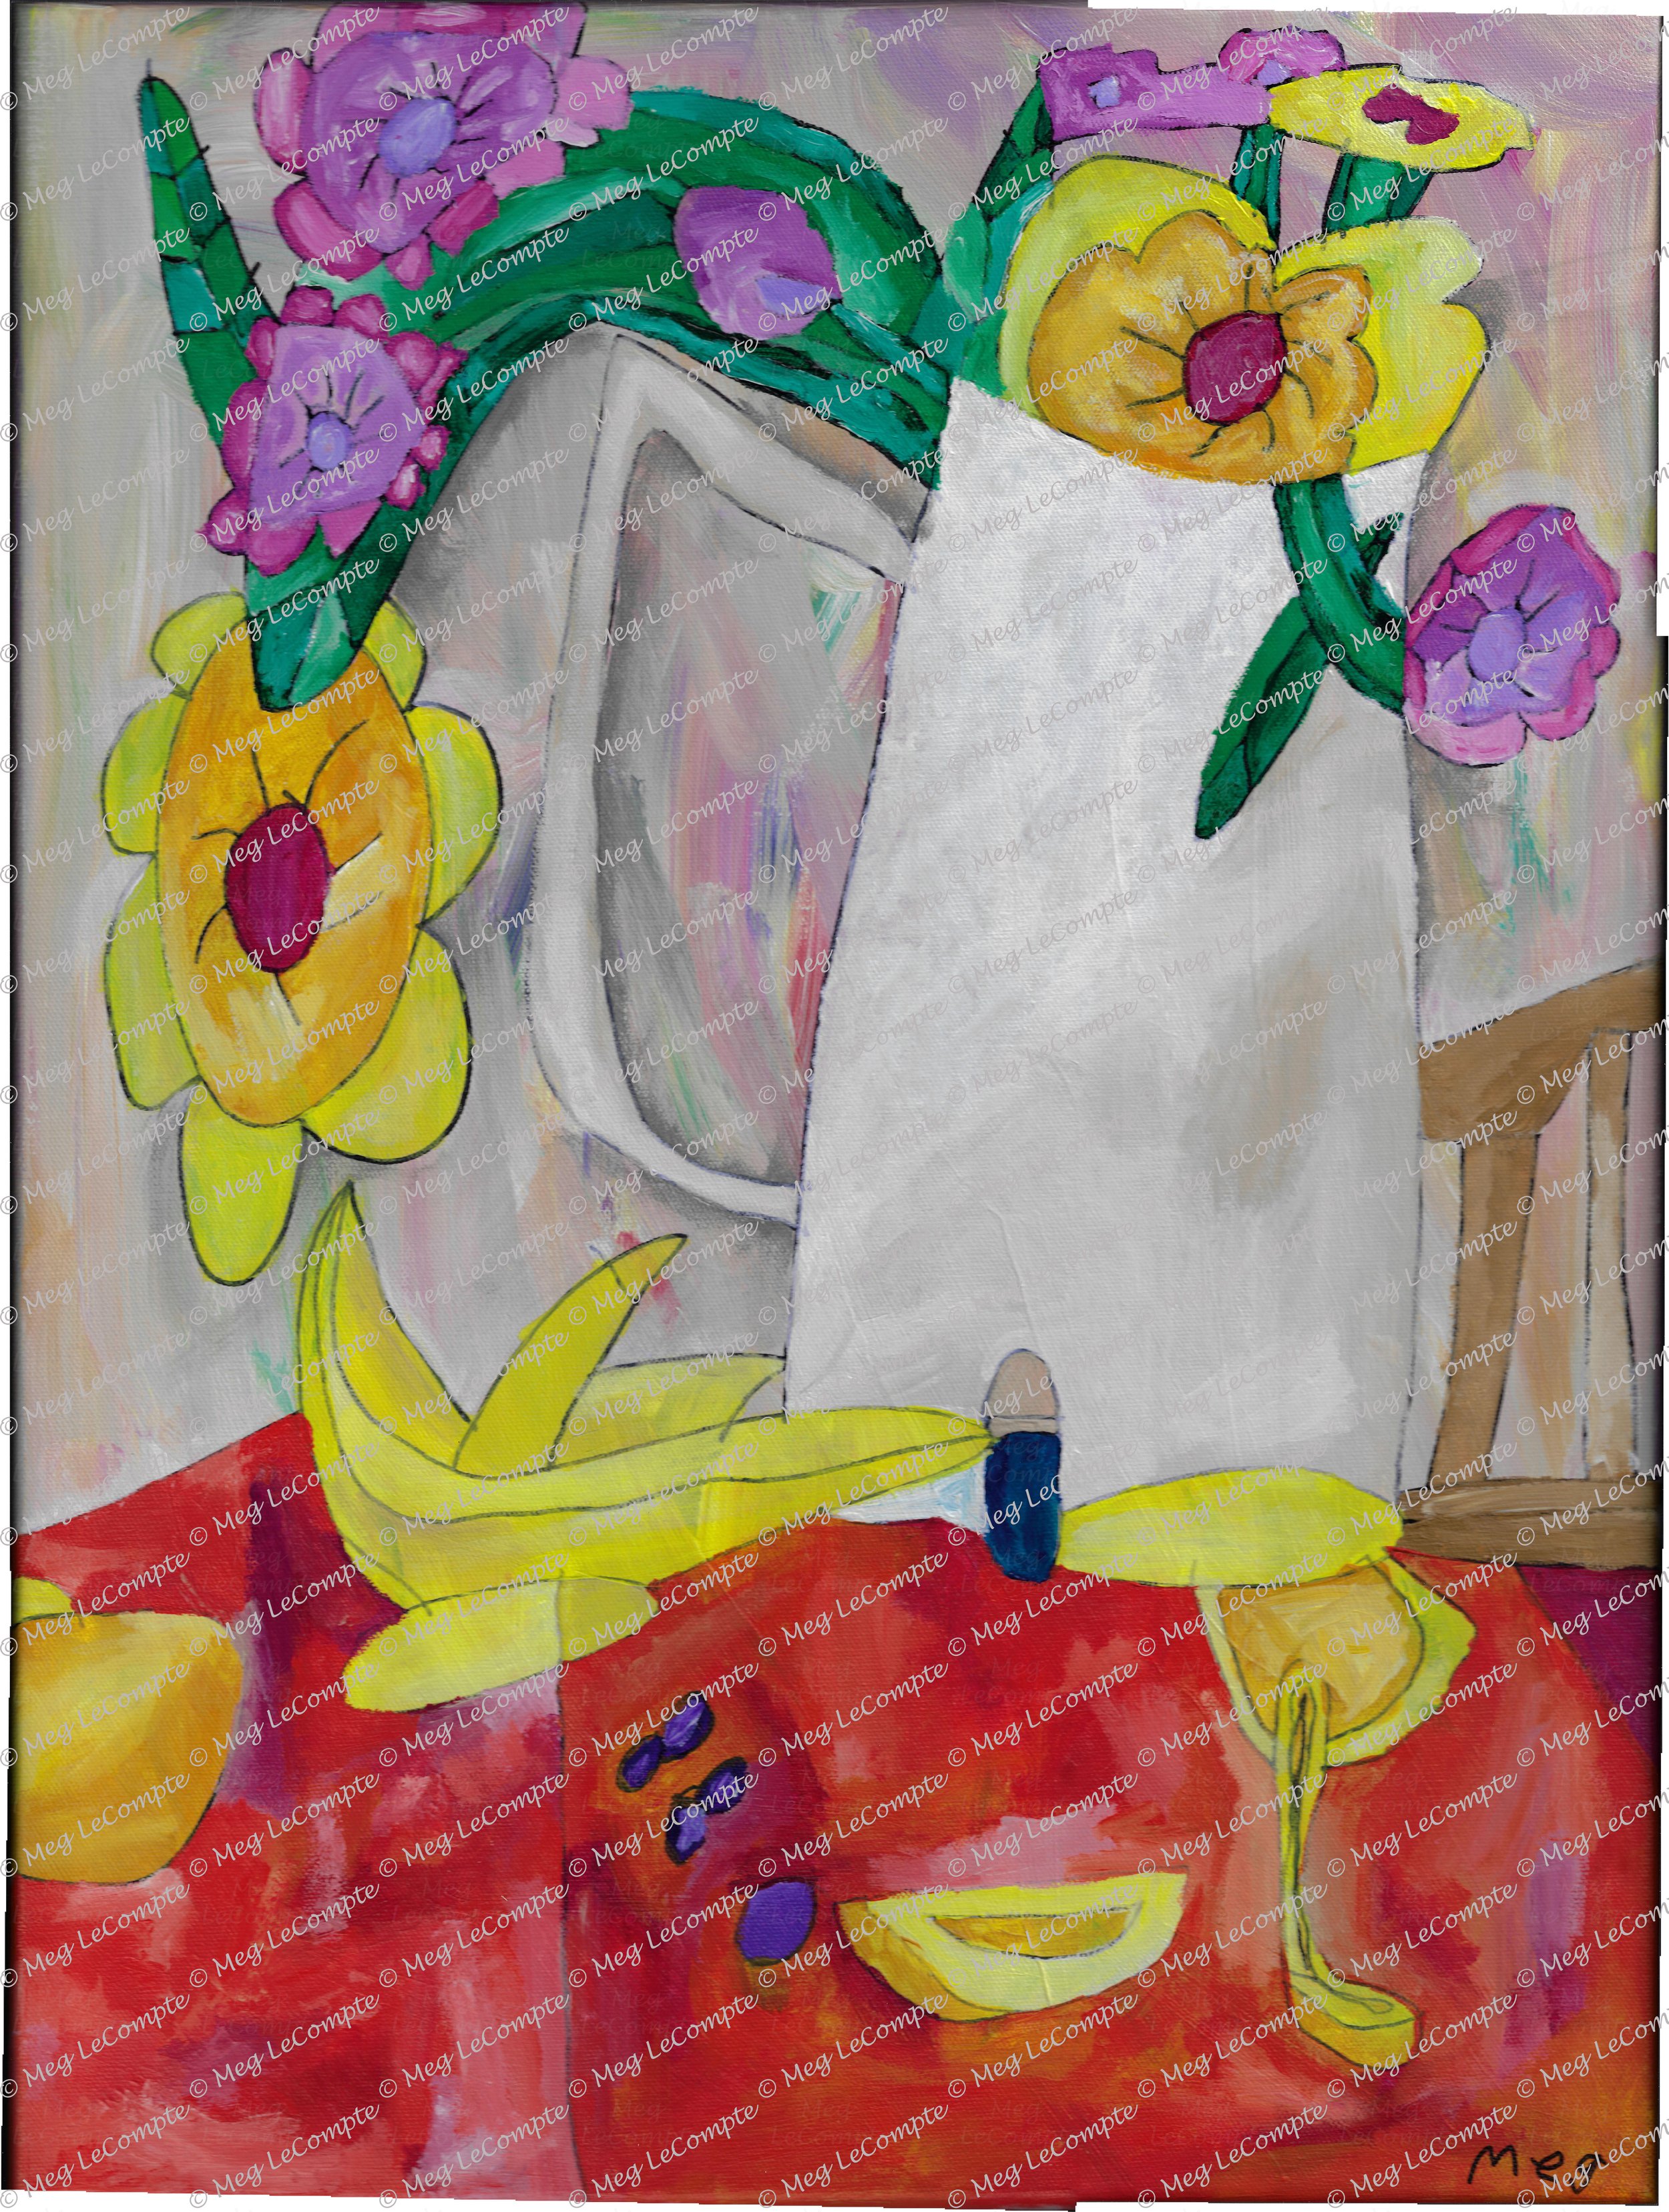 Flowers in the Vase at the Table.jpg